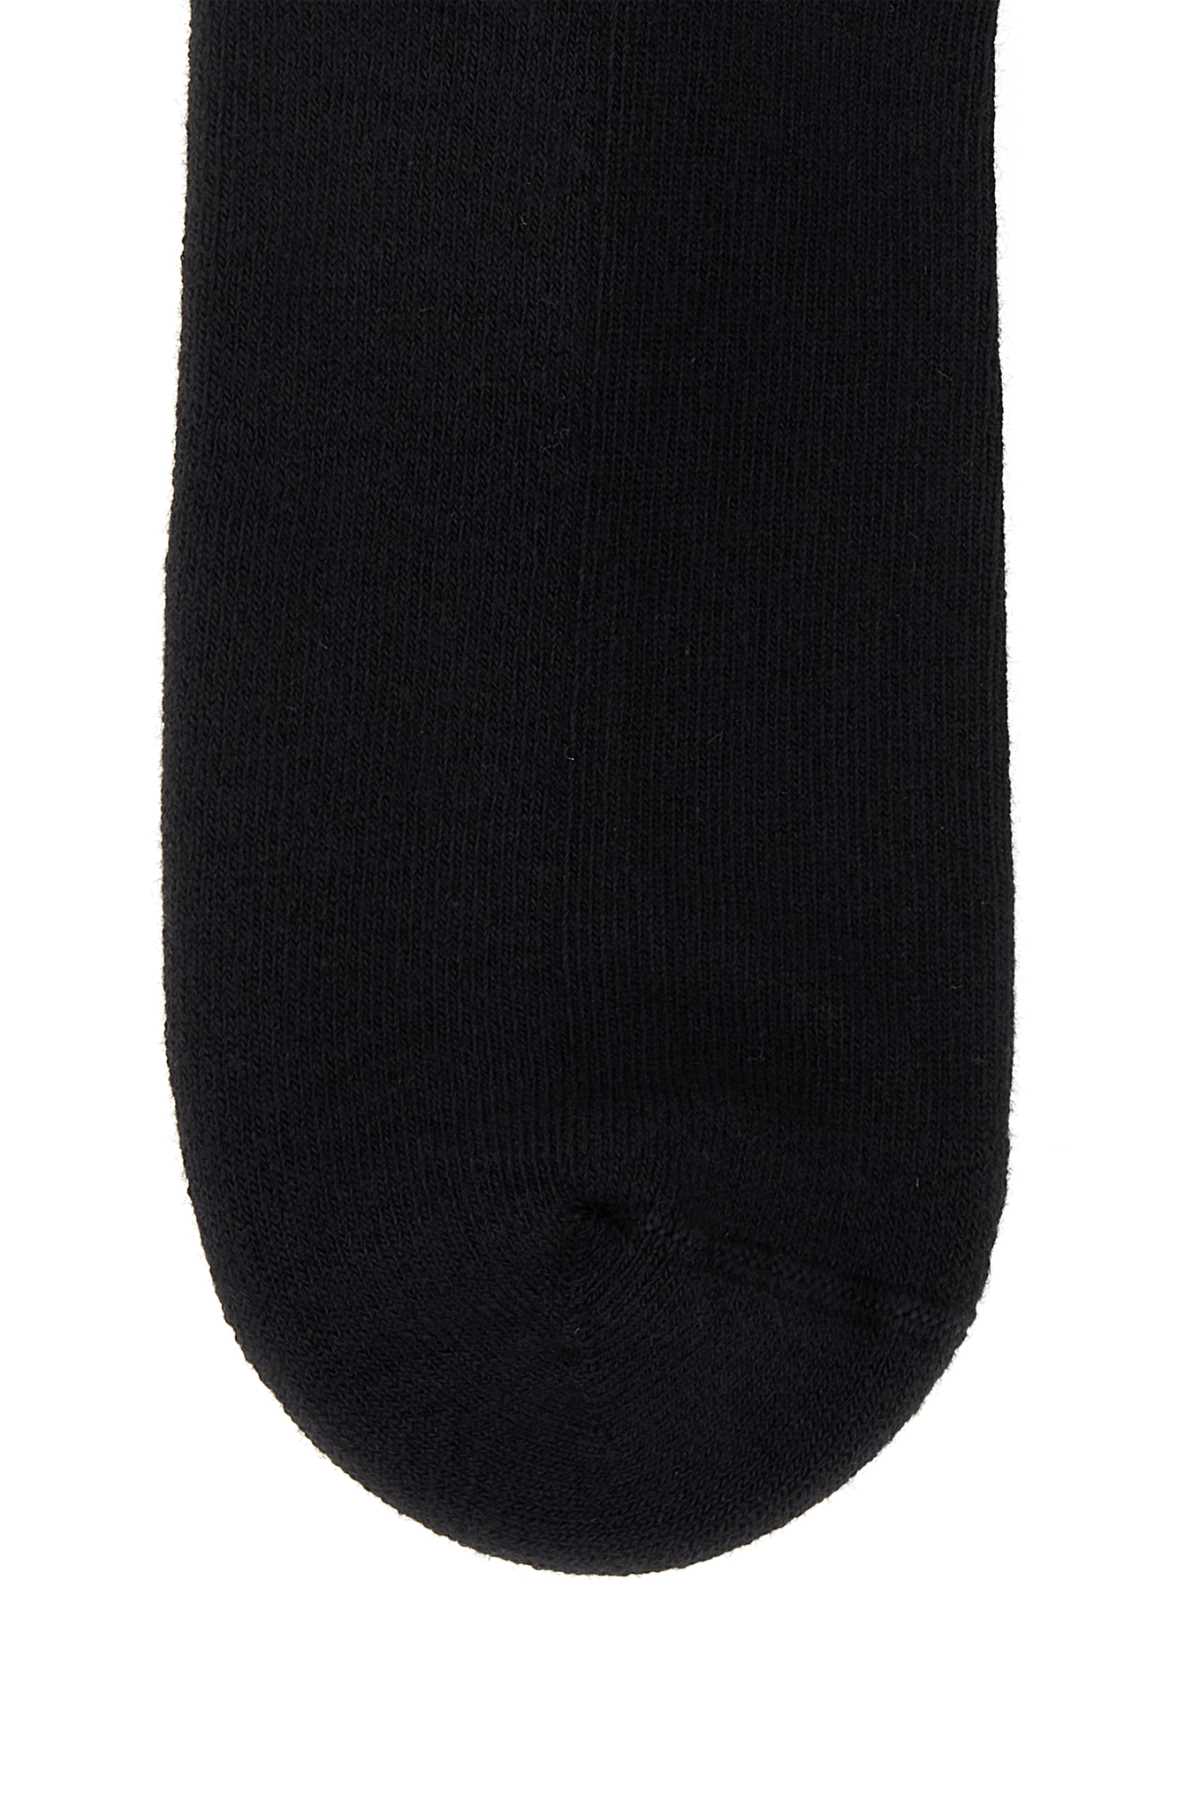 Carhartt Black Stretch Cotton Blend Chase Socks In Wht